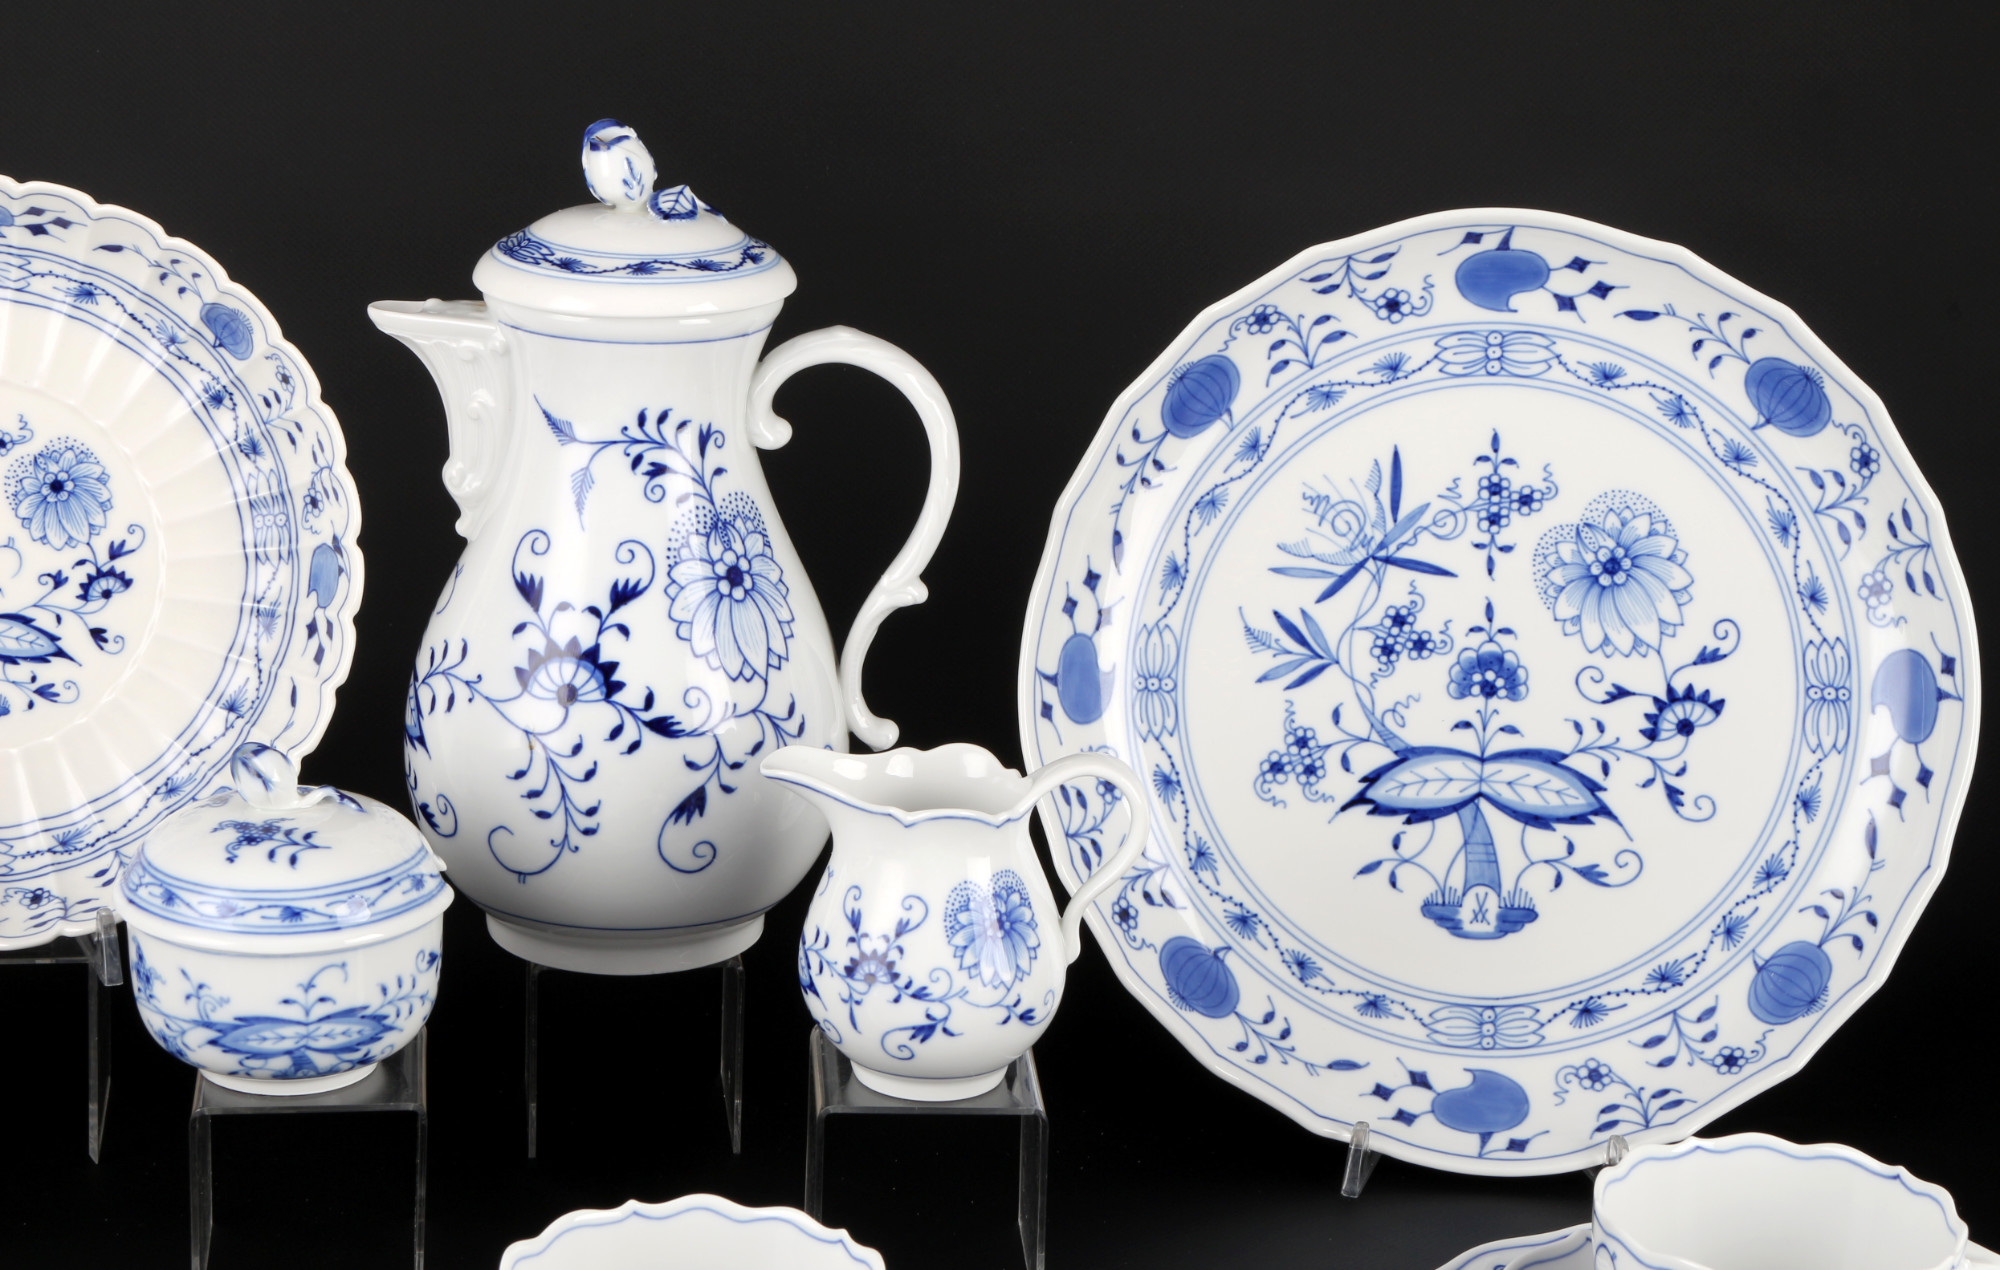 Meissen Onion Pattern coffee service for 7 persons 1st choice, Kaffeeservice für 7 Personen 1.Wahl, - Image 3 of 6